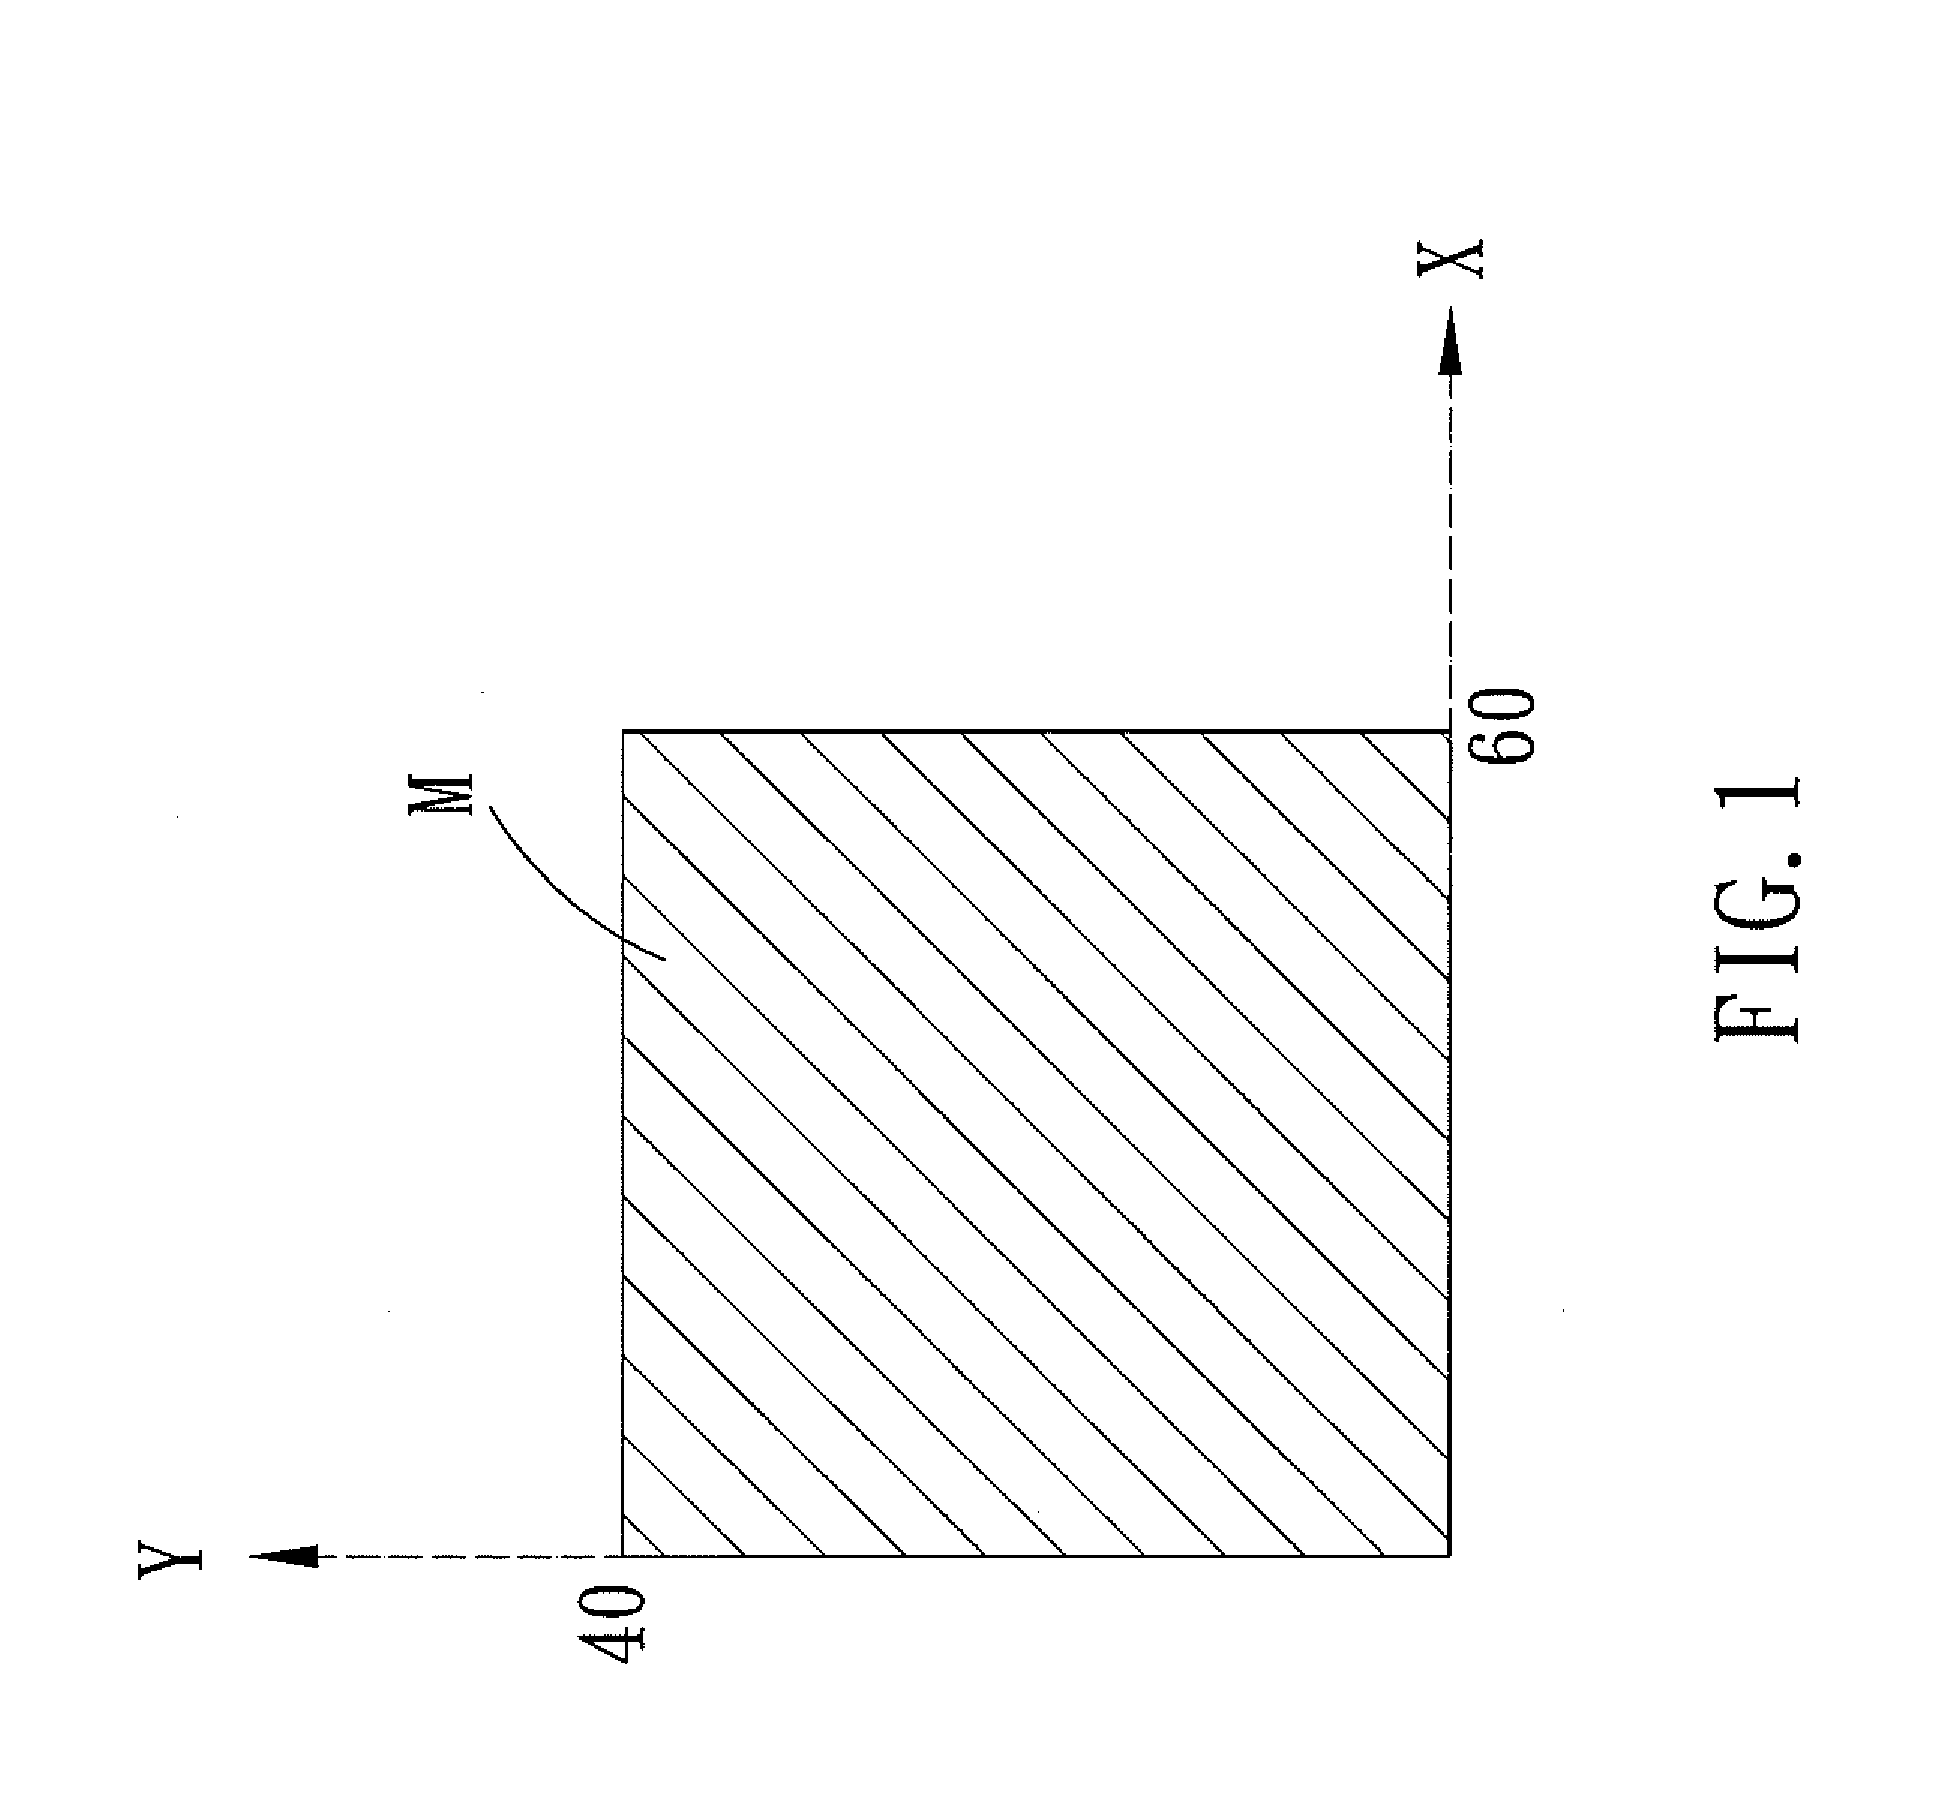 Charging Method for a Lead-acid Battery